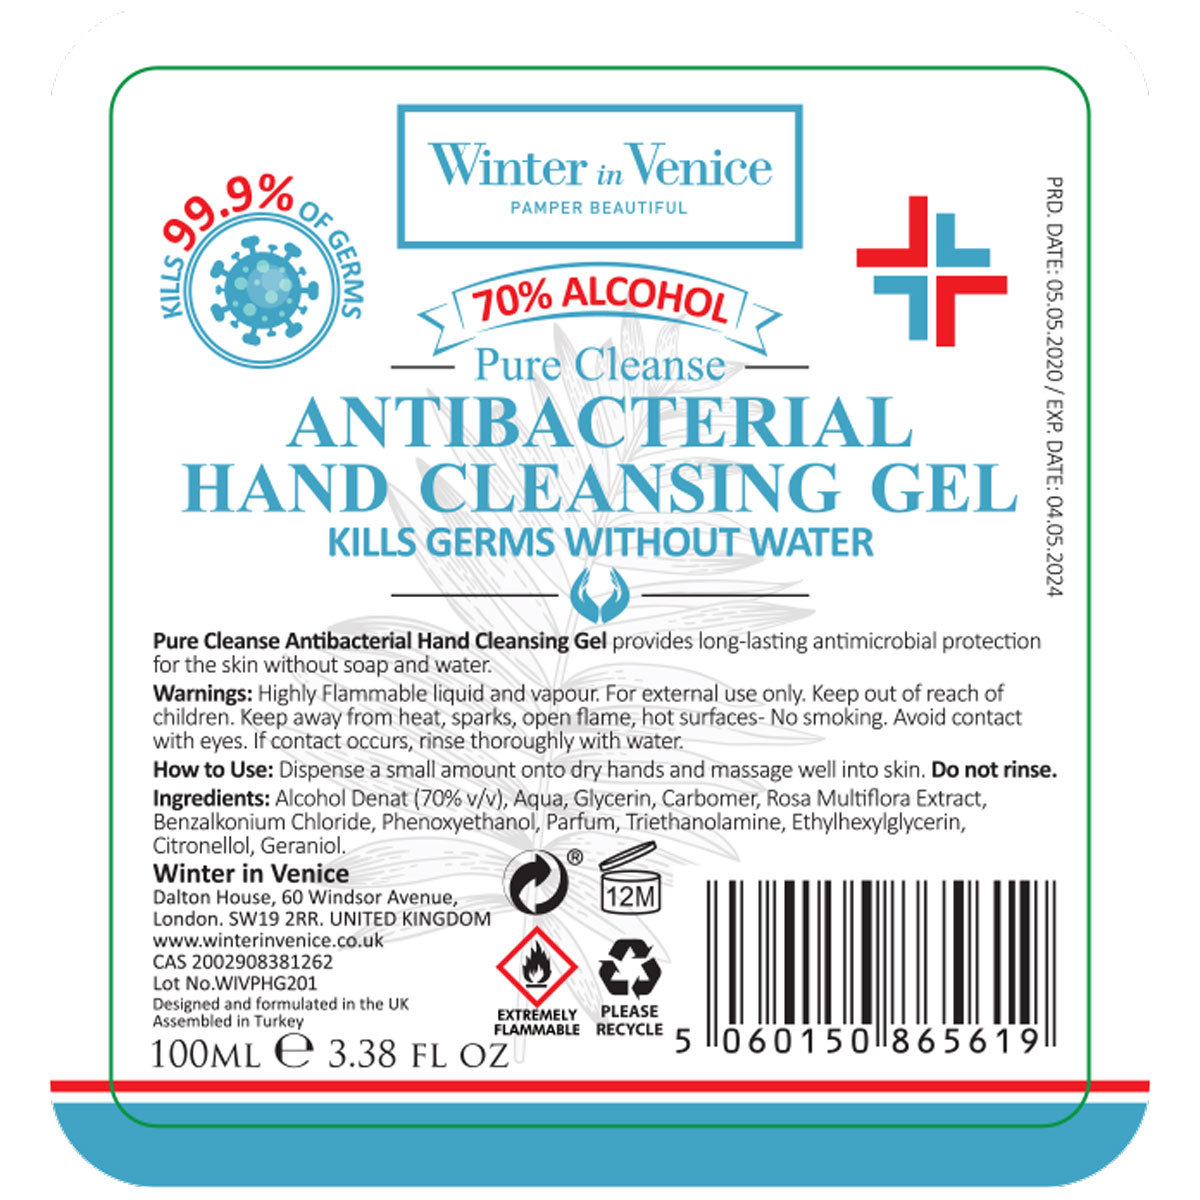 Winter in Venice Antibacterial Hand Cleansing Gel, 10 x 100ml (70% Alcohol)